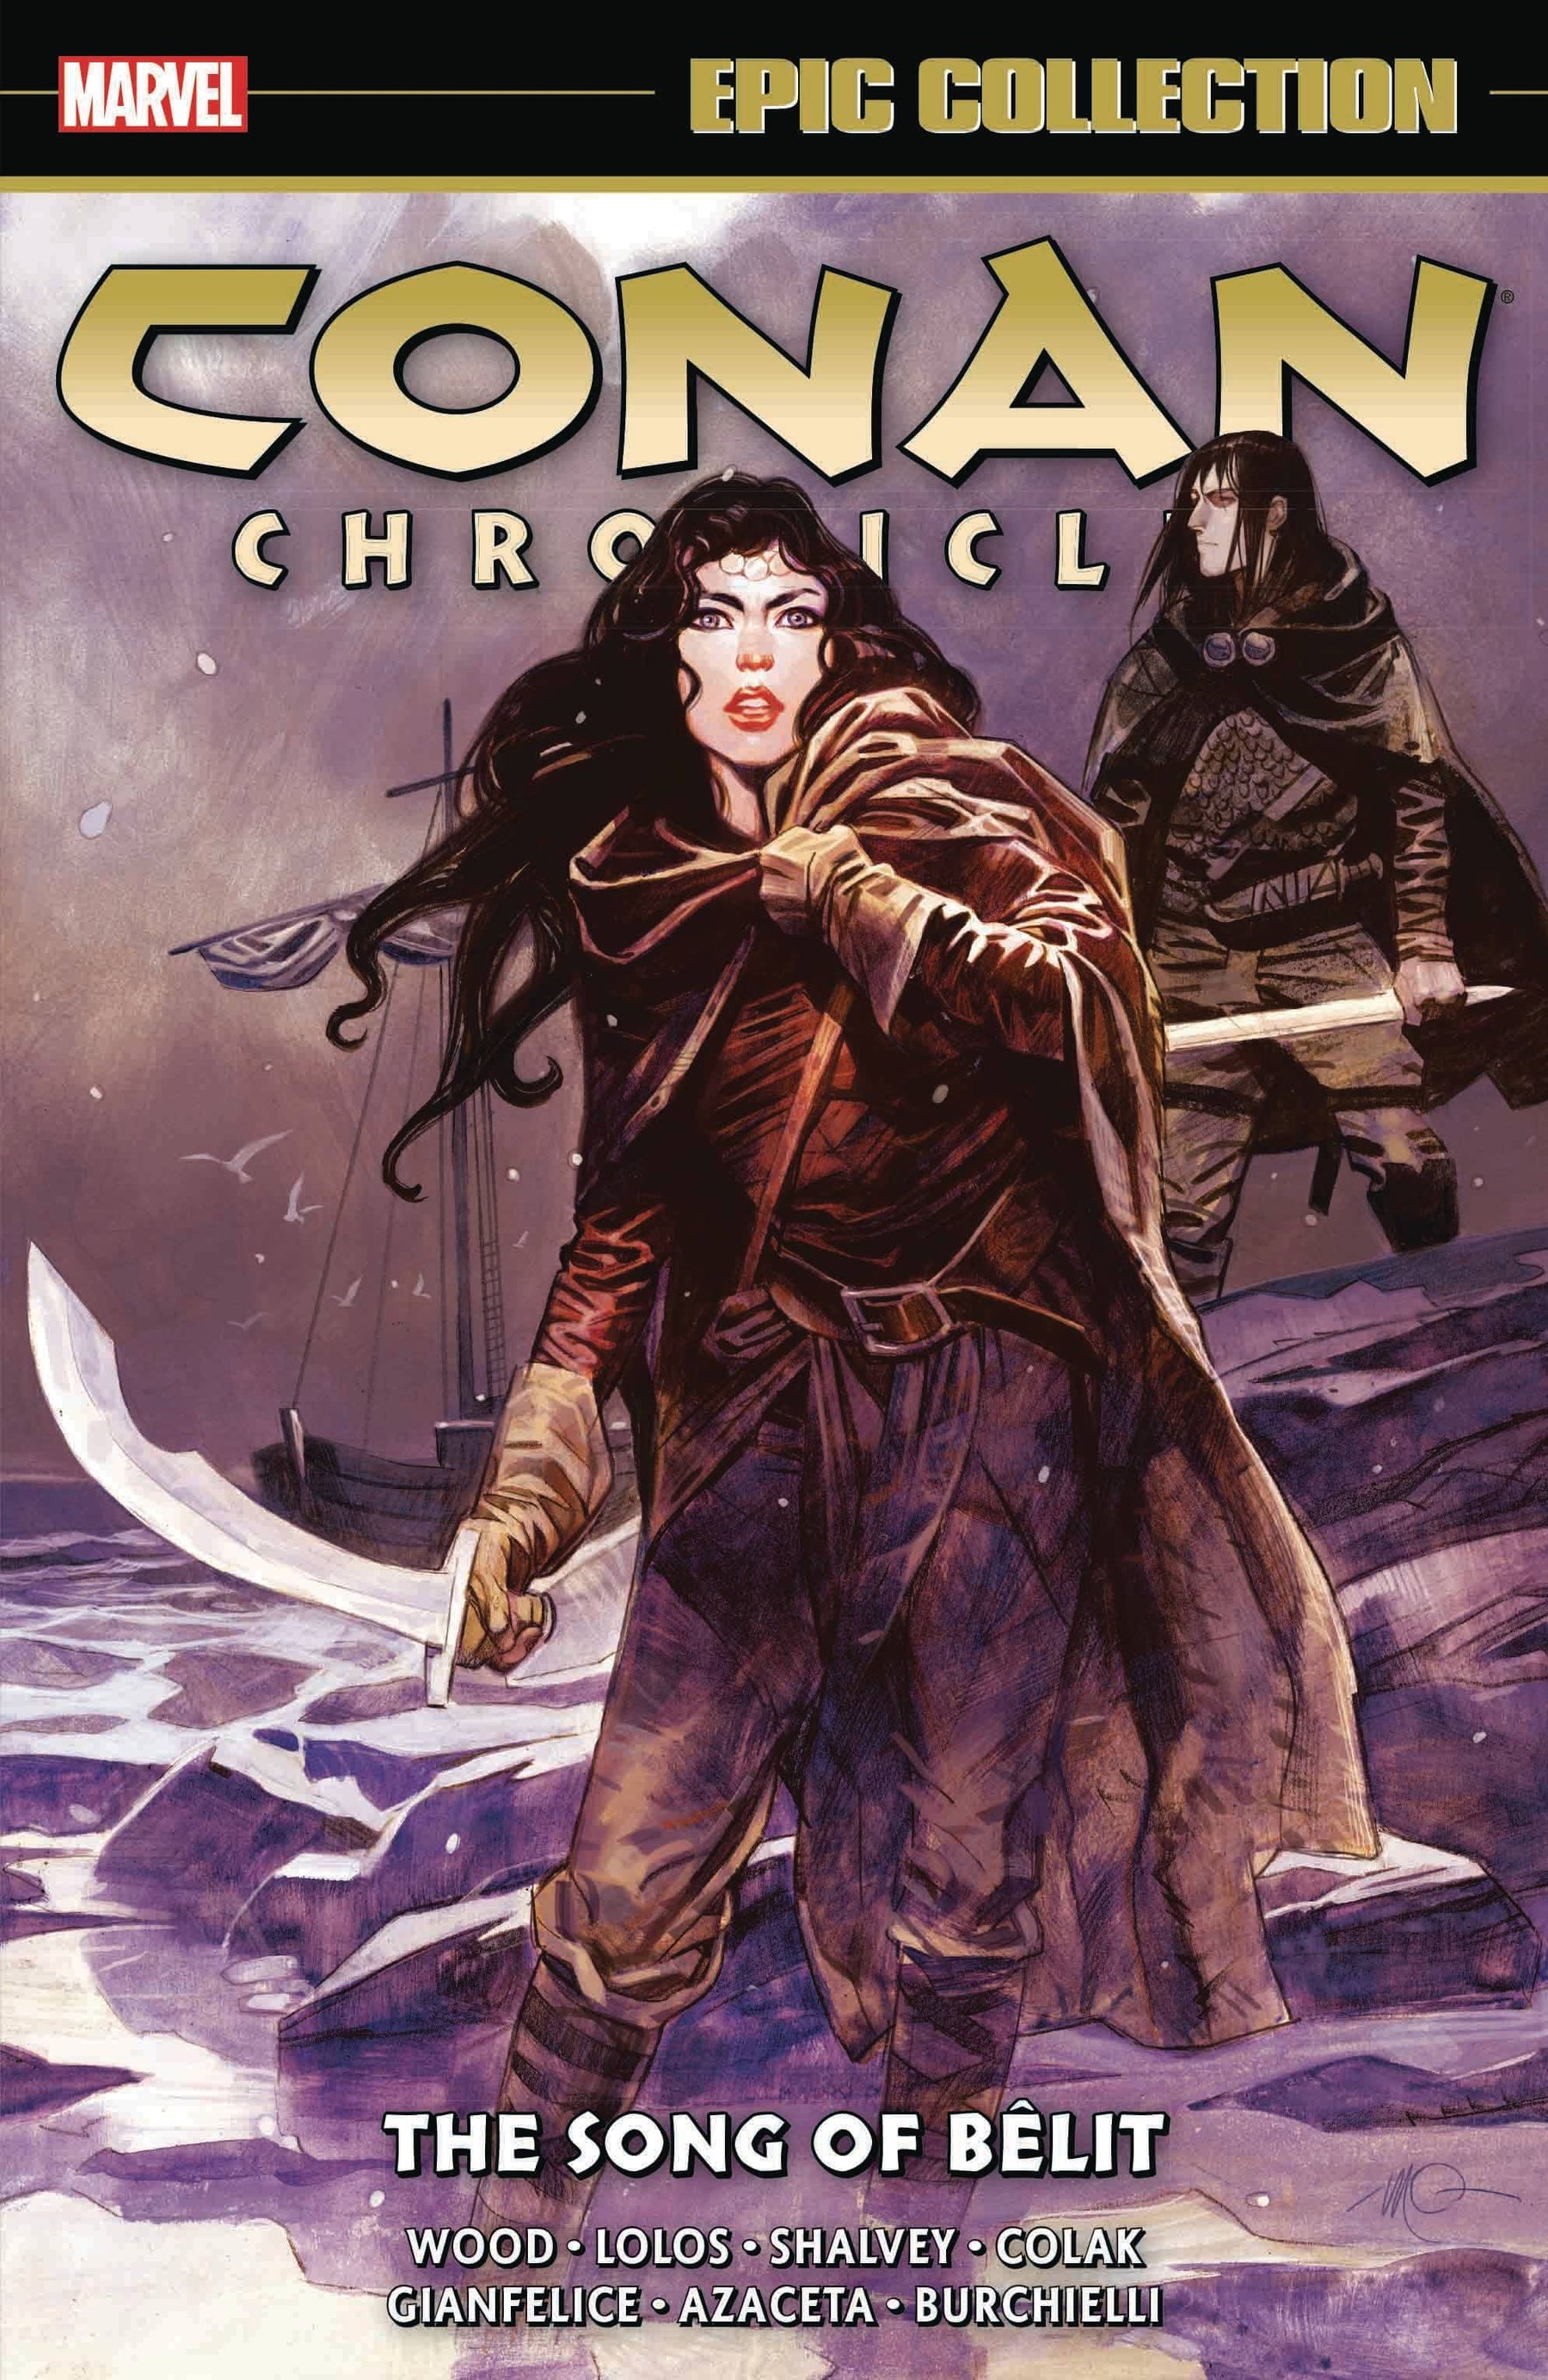 Conan Chronicles: Epic Collection - Song of Belit TP - Third Eye